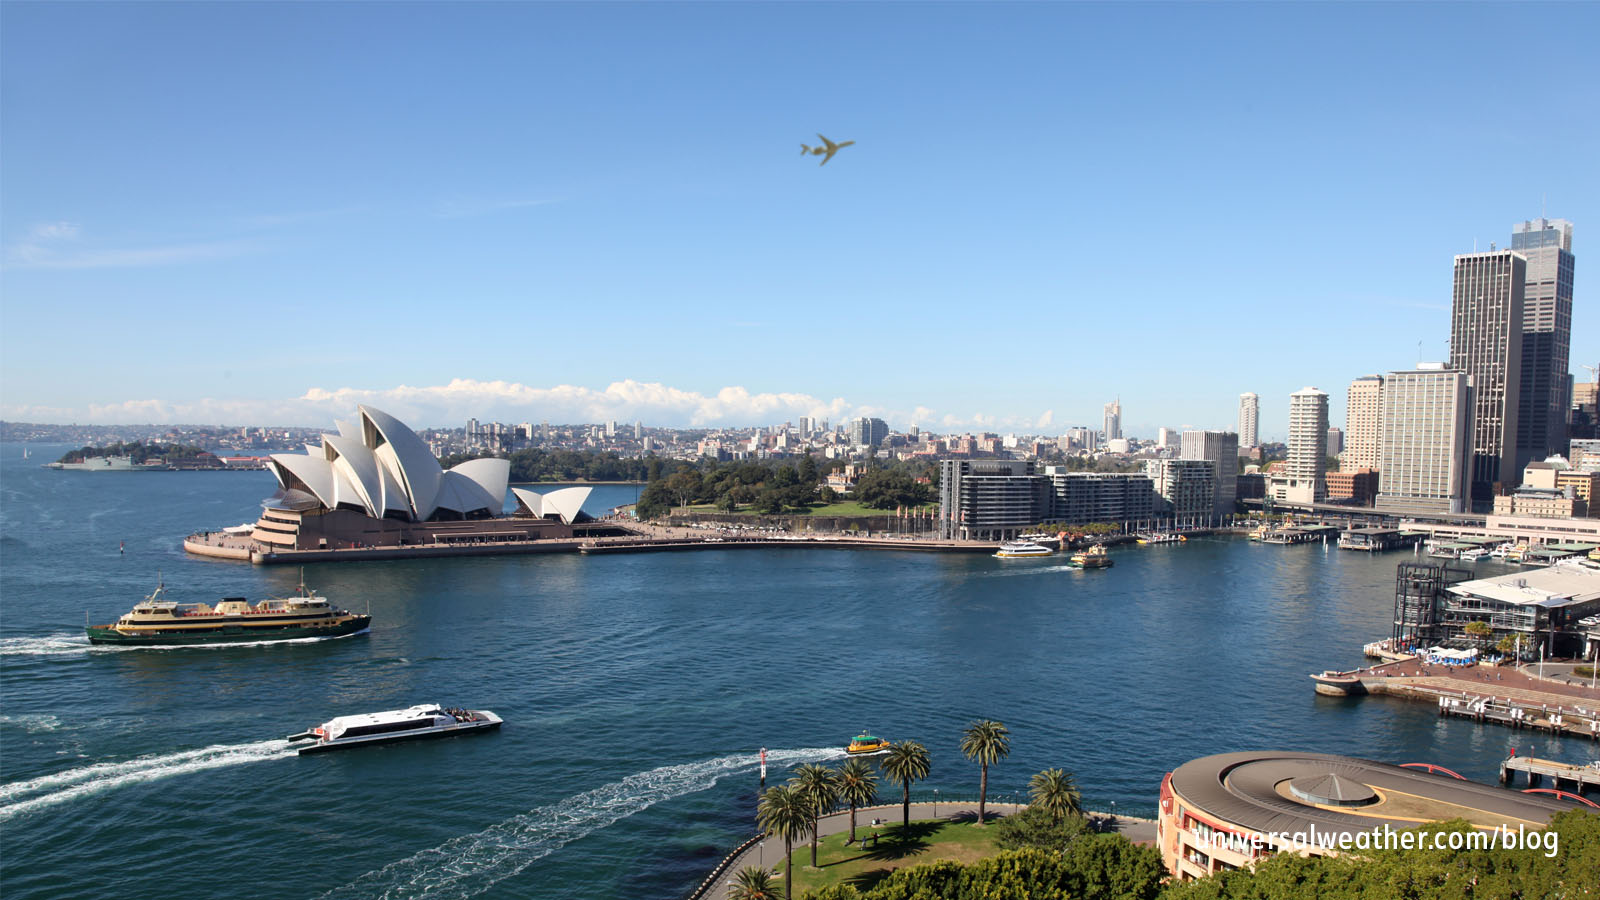 Business Aircraft Ops to Australia: Part 1 – Top Airport Options